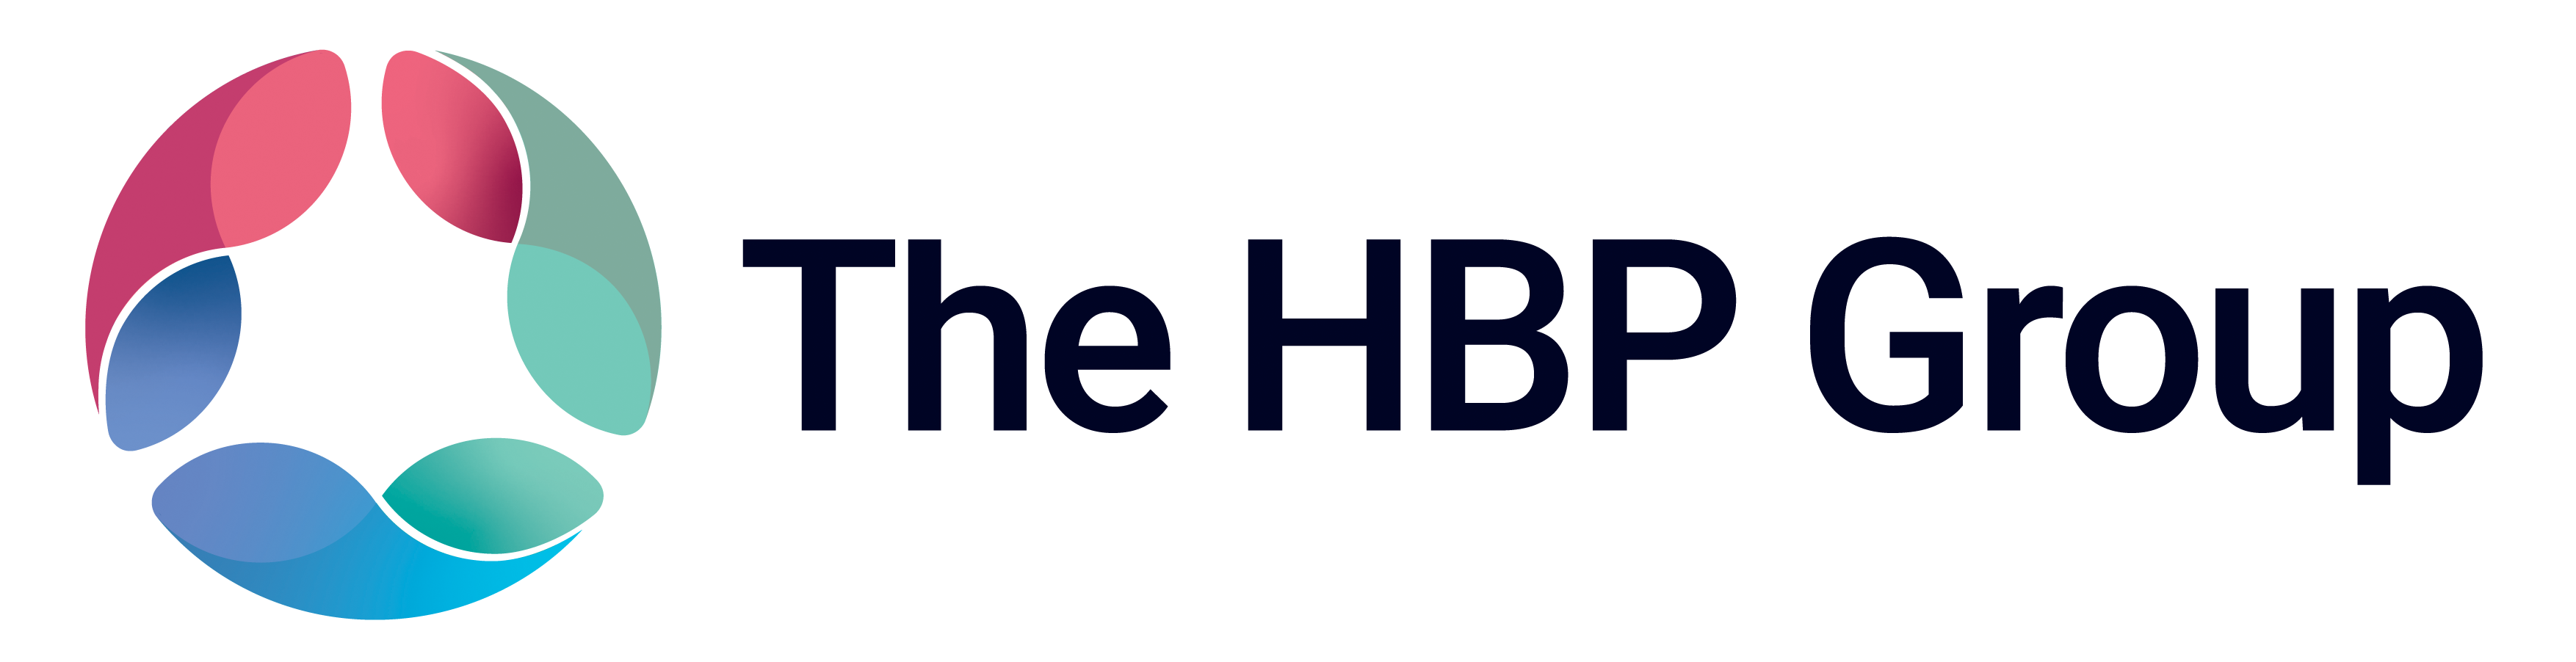 The HBP Group